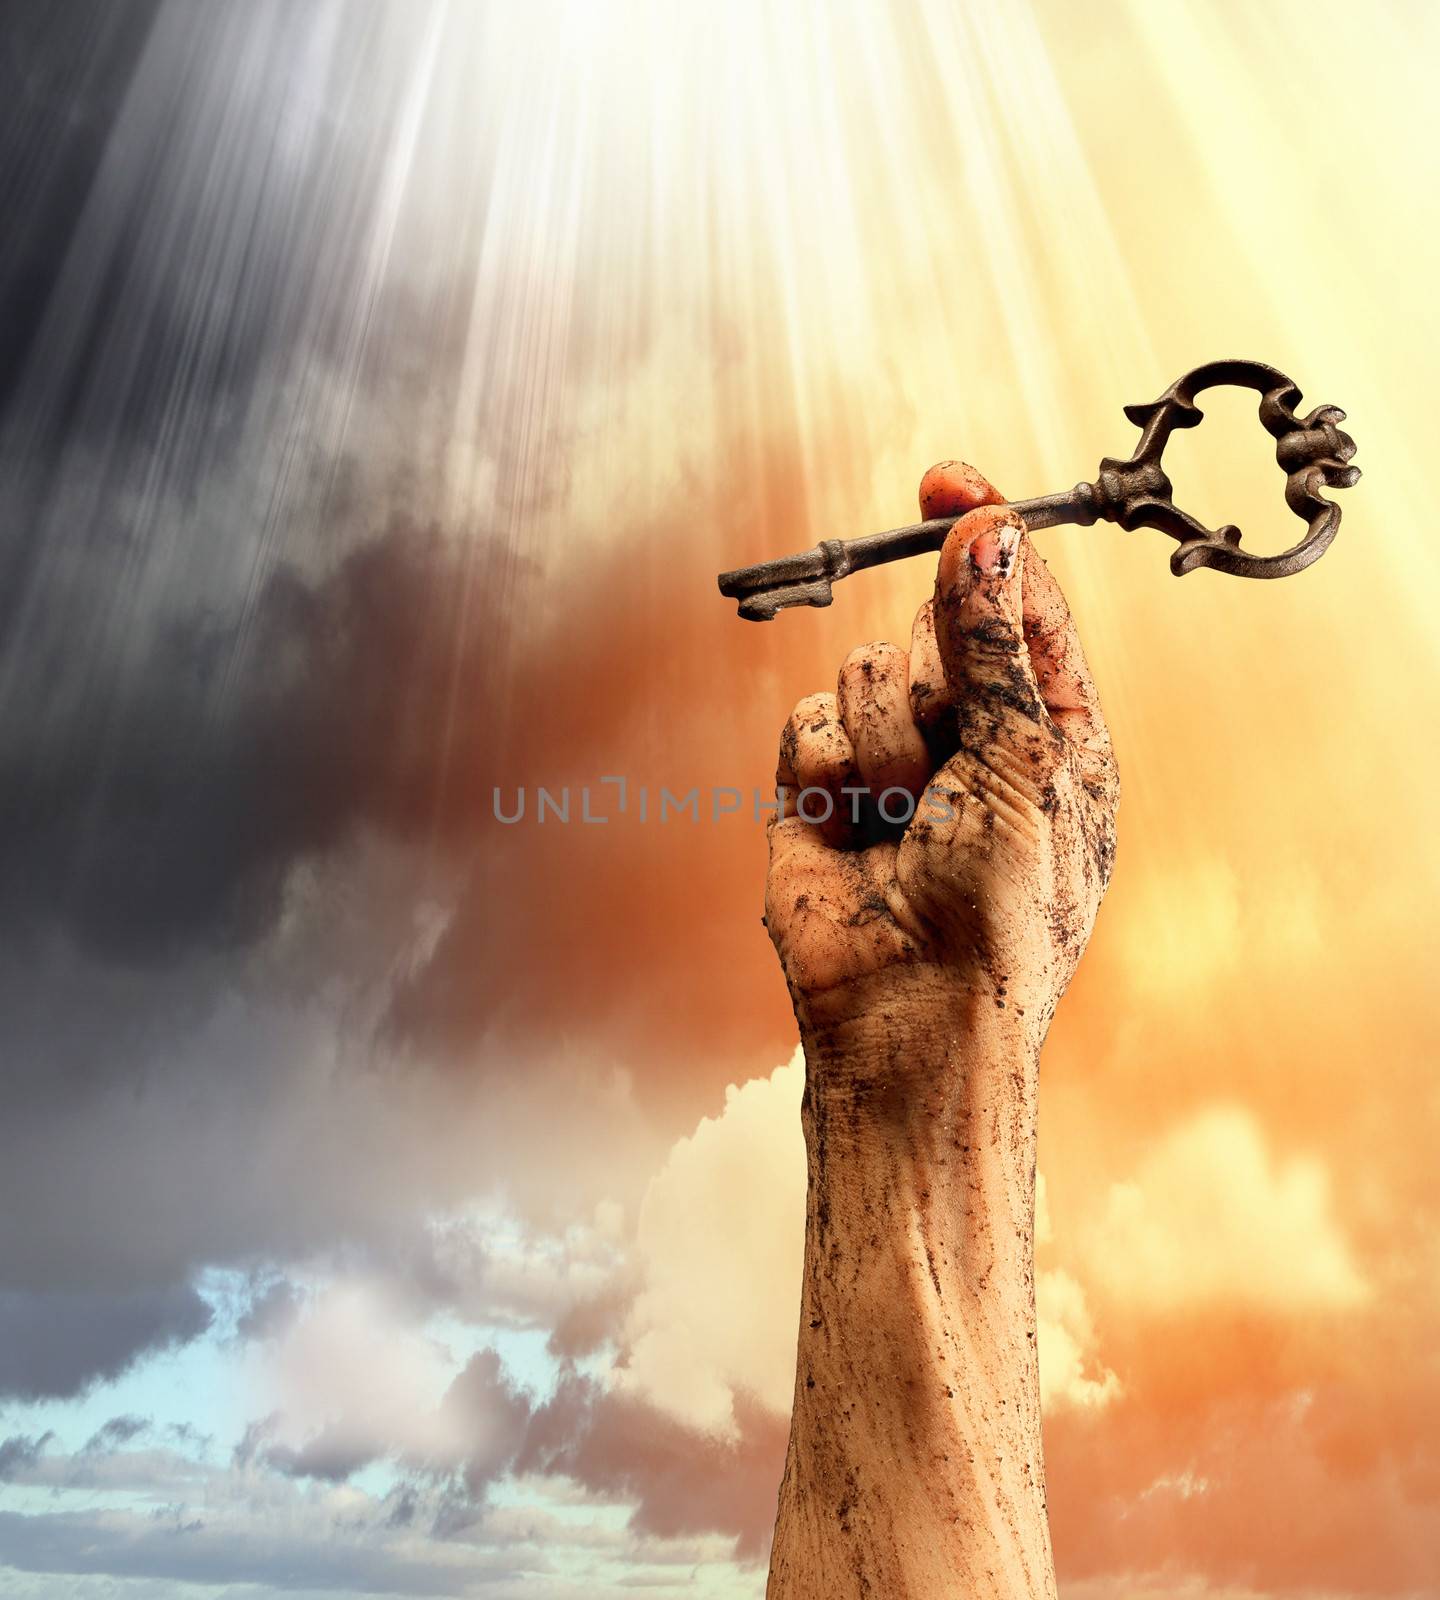 Key in human hand. Struggle and success